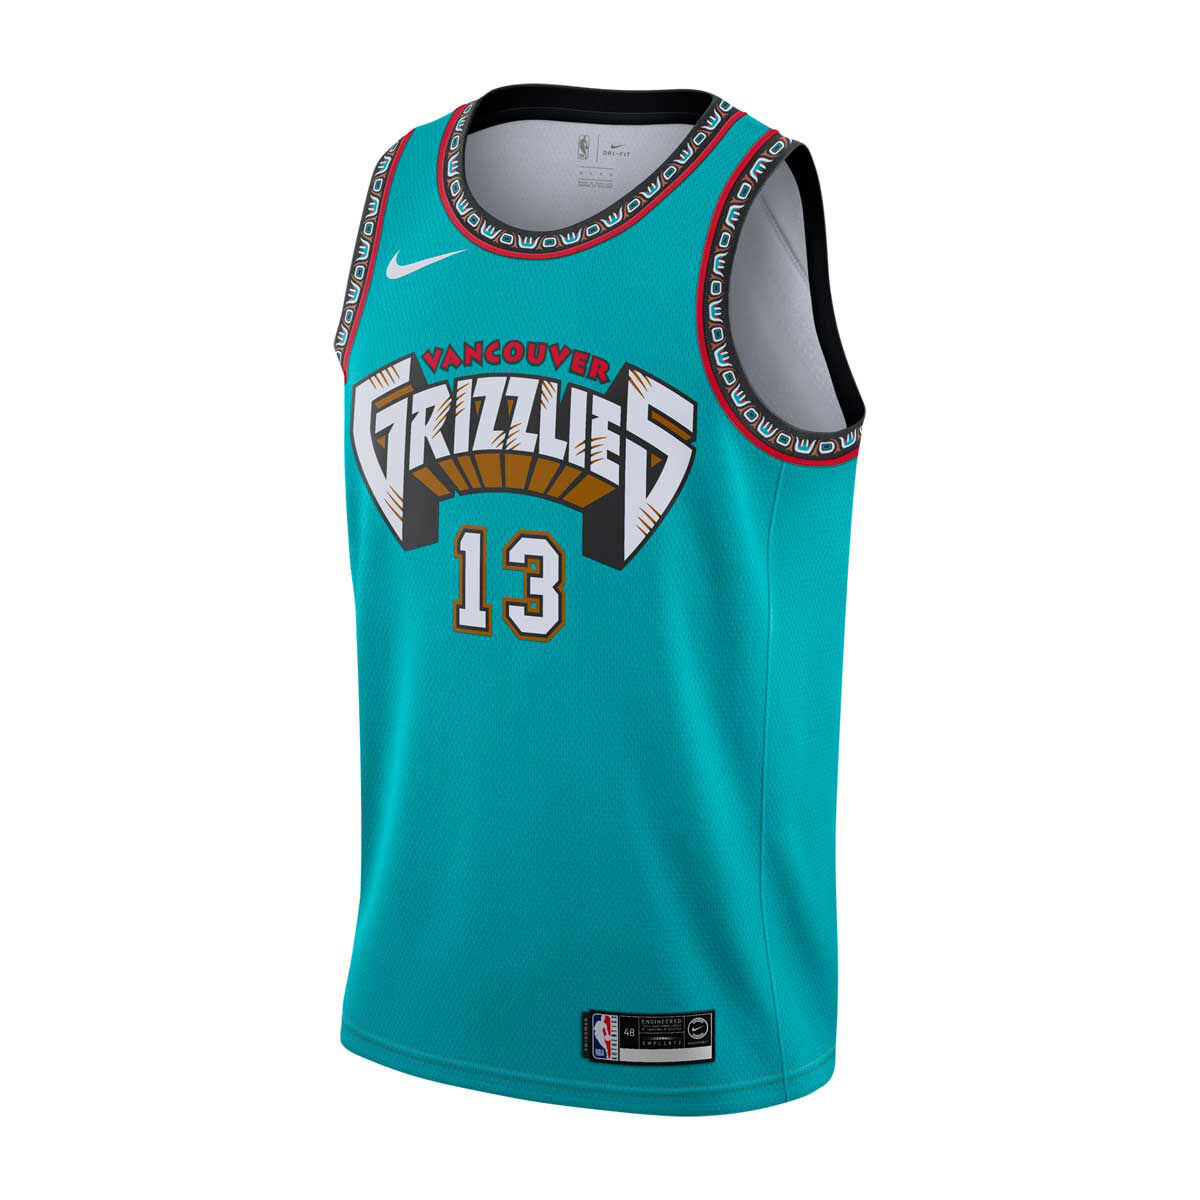 vancouver grizzlies jersey for sale